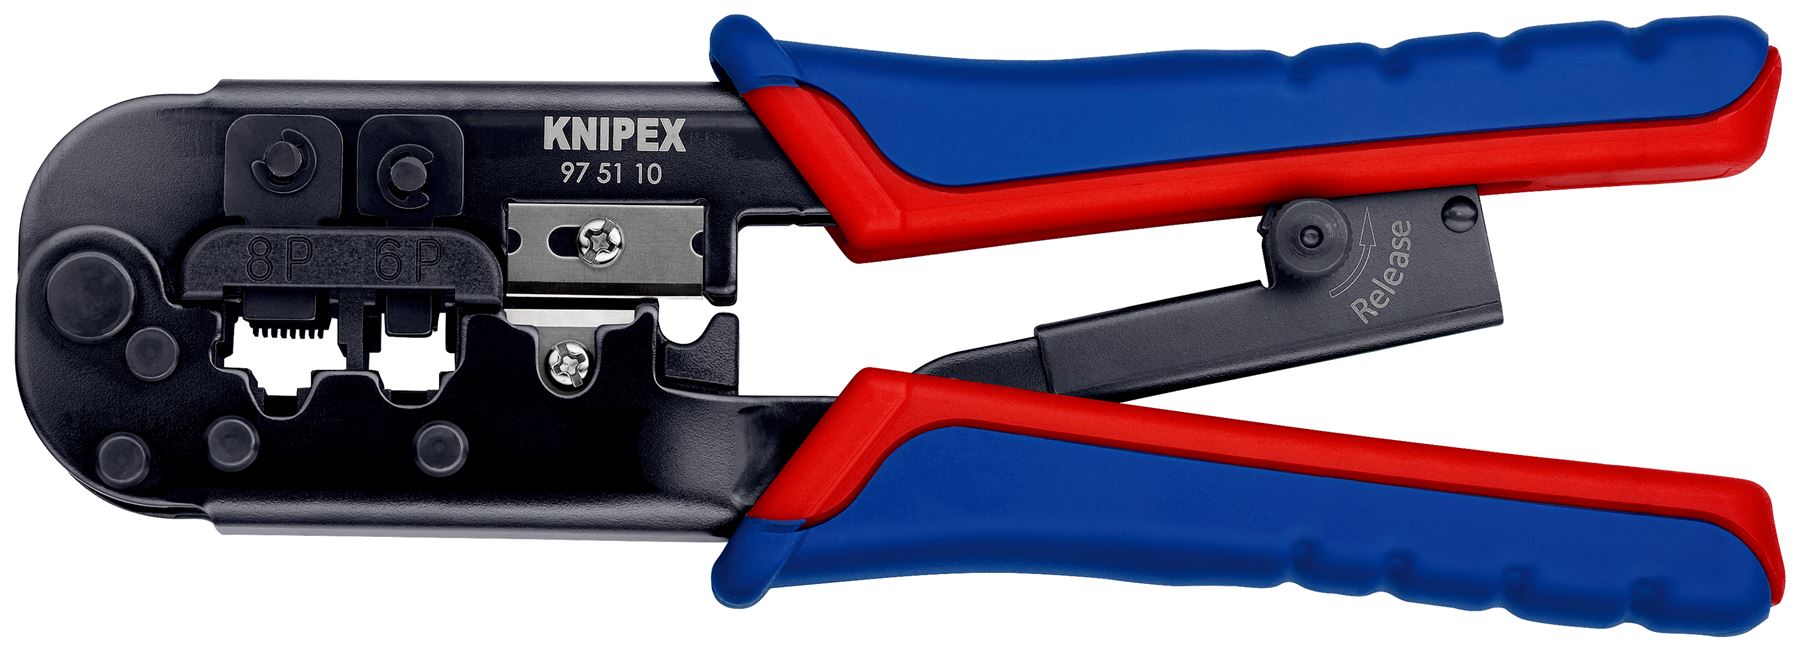 Knipex Crimping Pliers for Western Plugs 190mm Multi Component Grips 97 51 10 SB